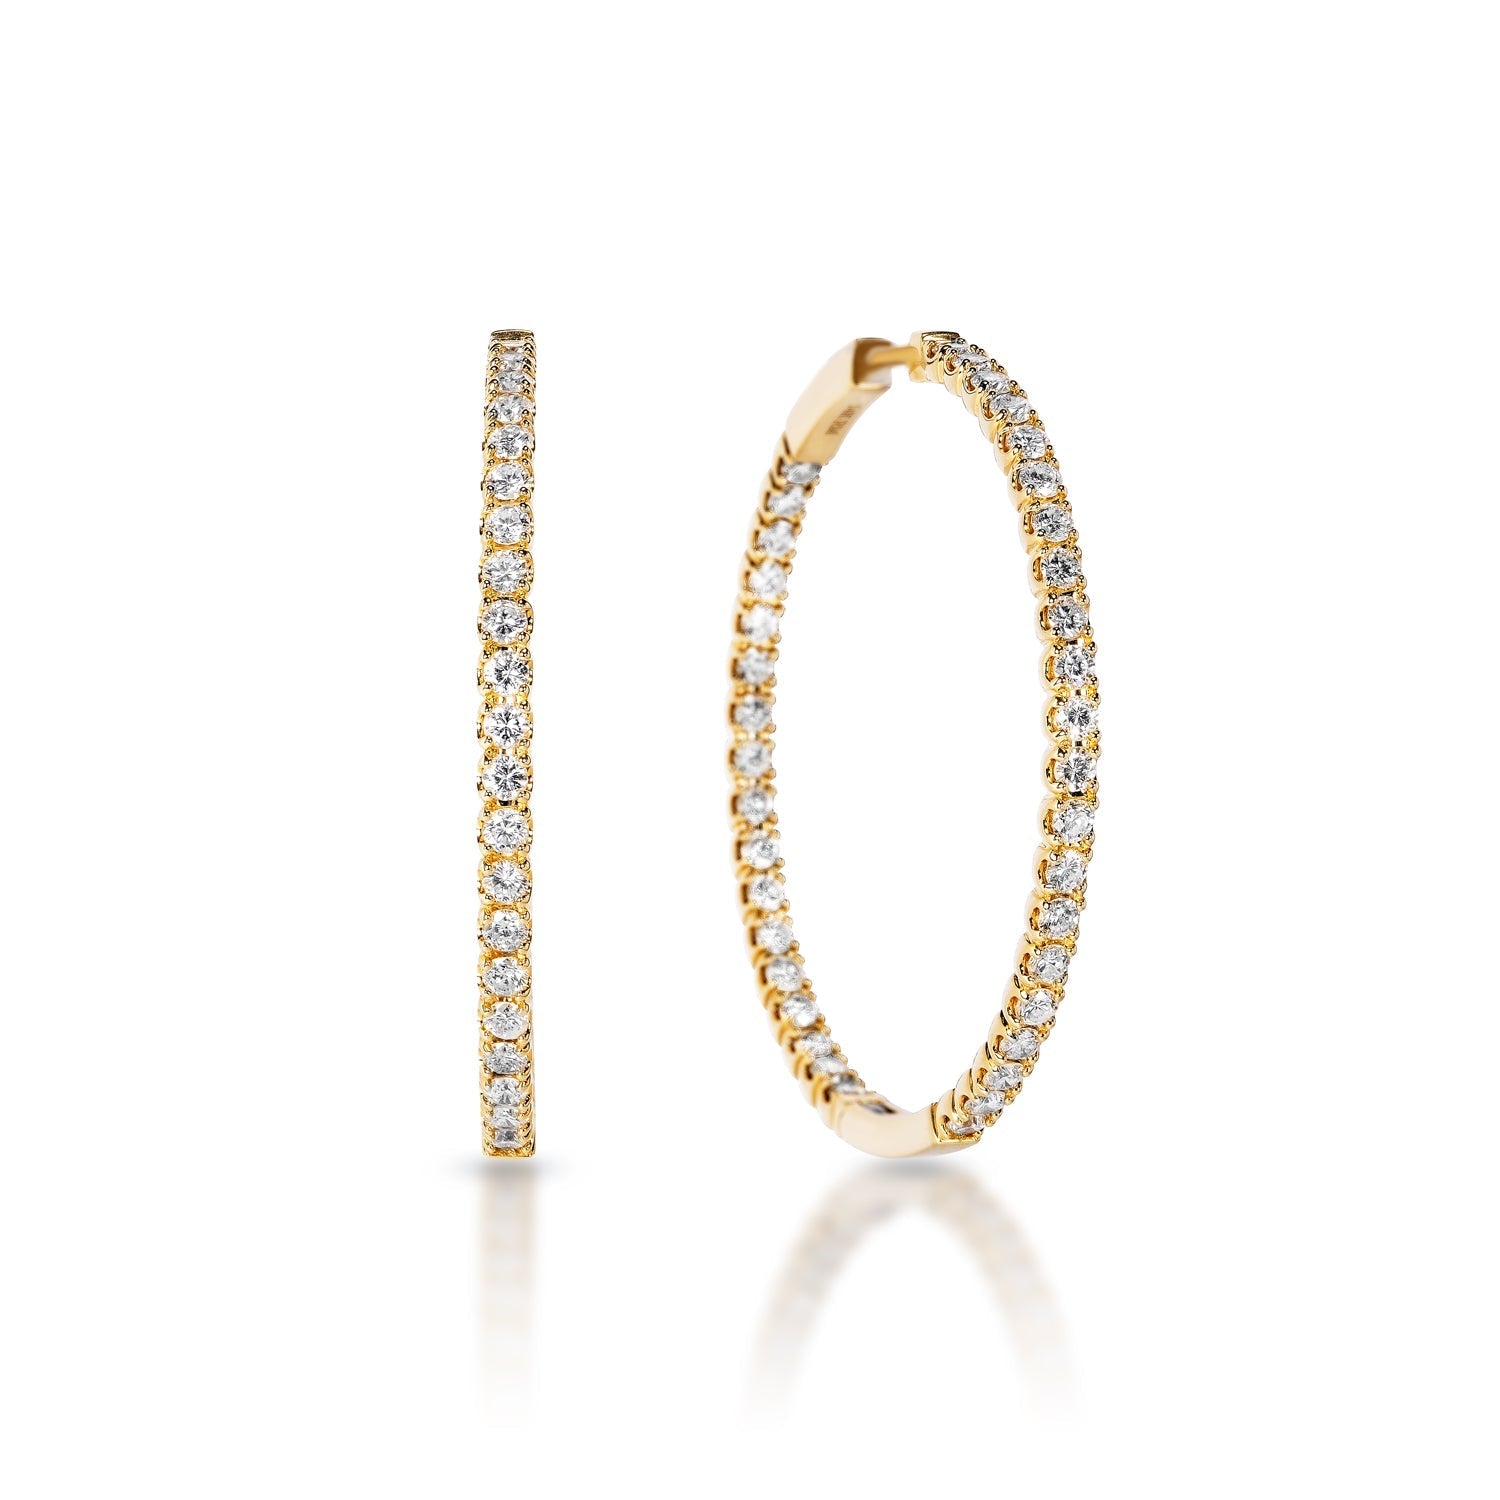 Shayna 3 Carat Diamond Hoop Slim Round Brilliant Earrings in 14k Yellow Gold Front and Side View